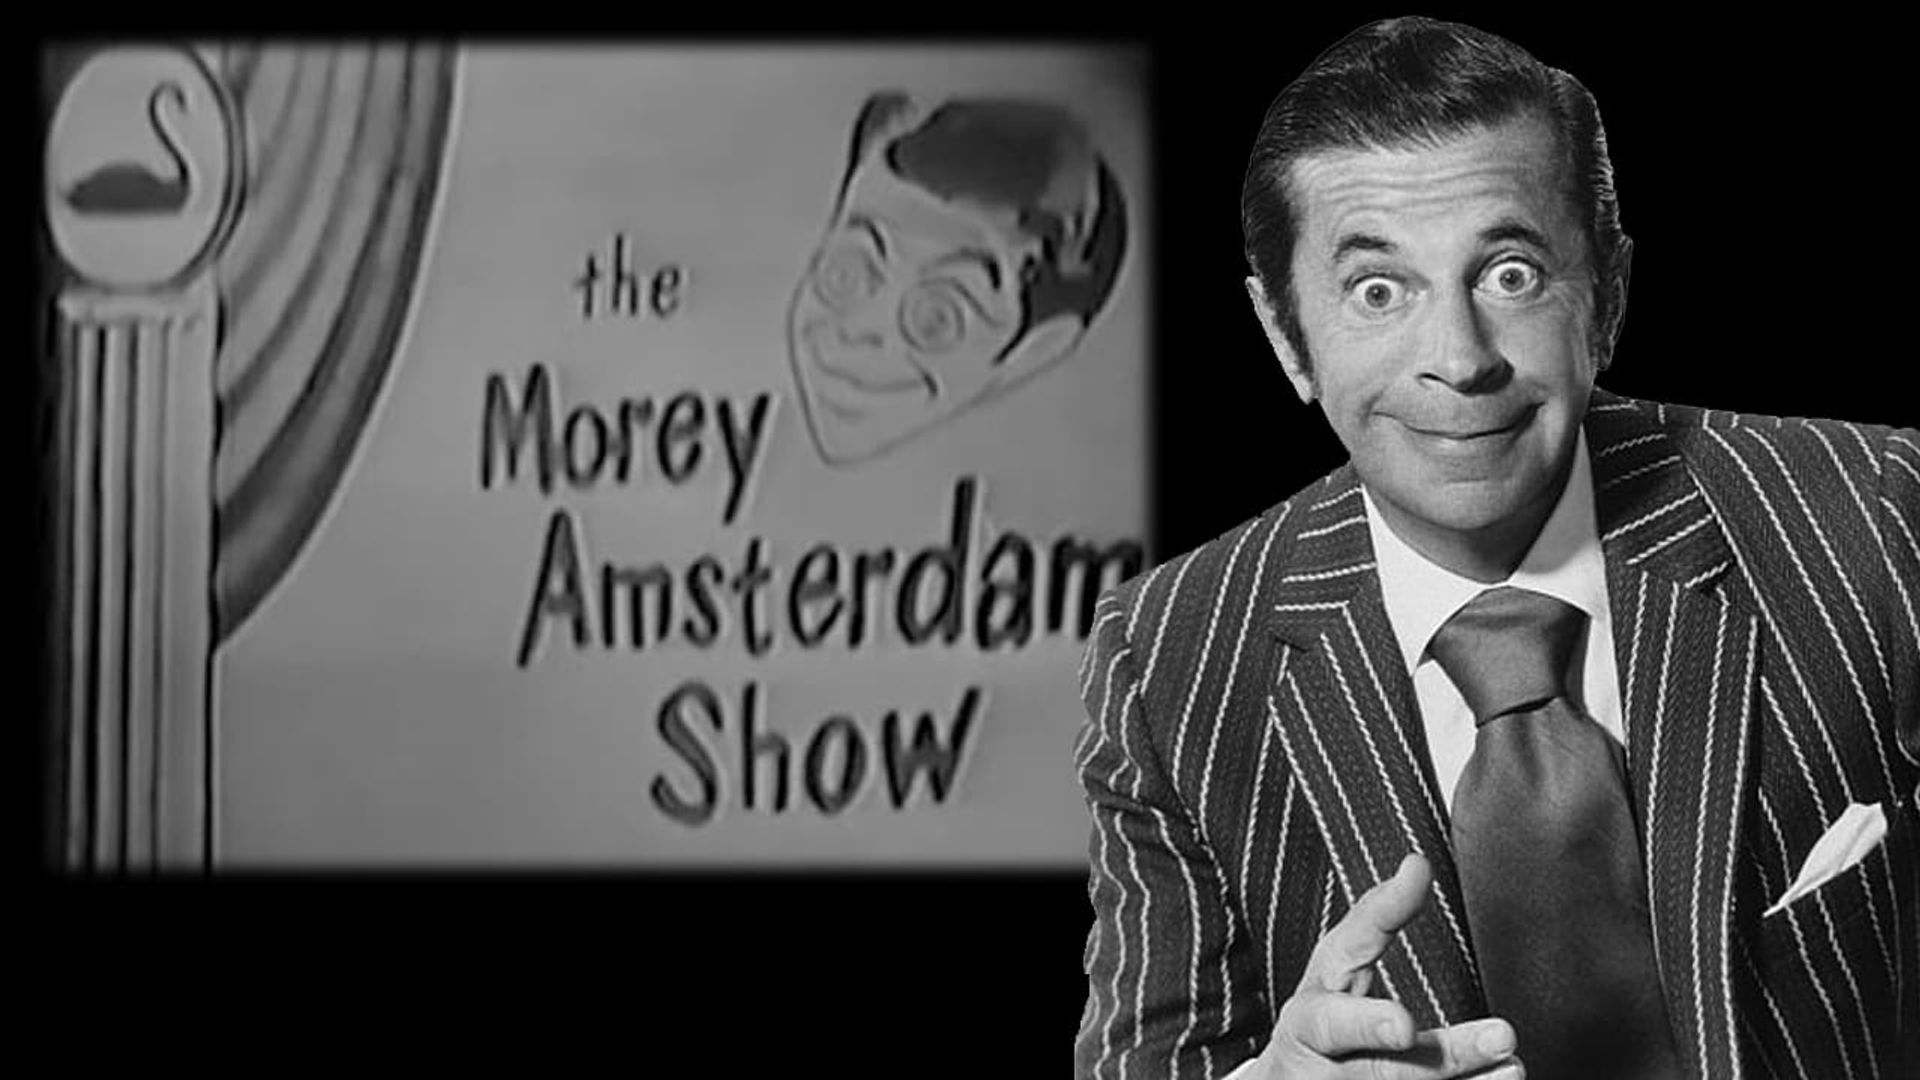 The Morey Amsterdam Show background